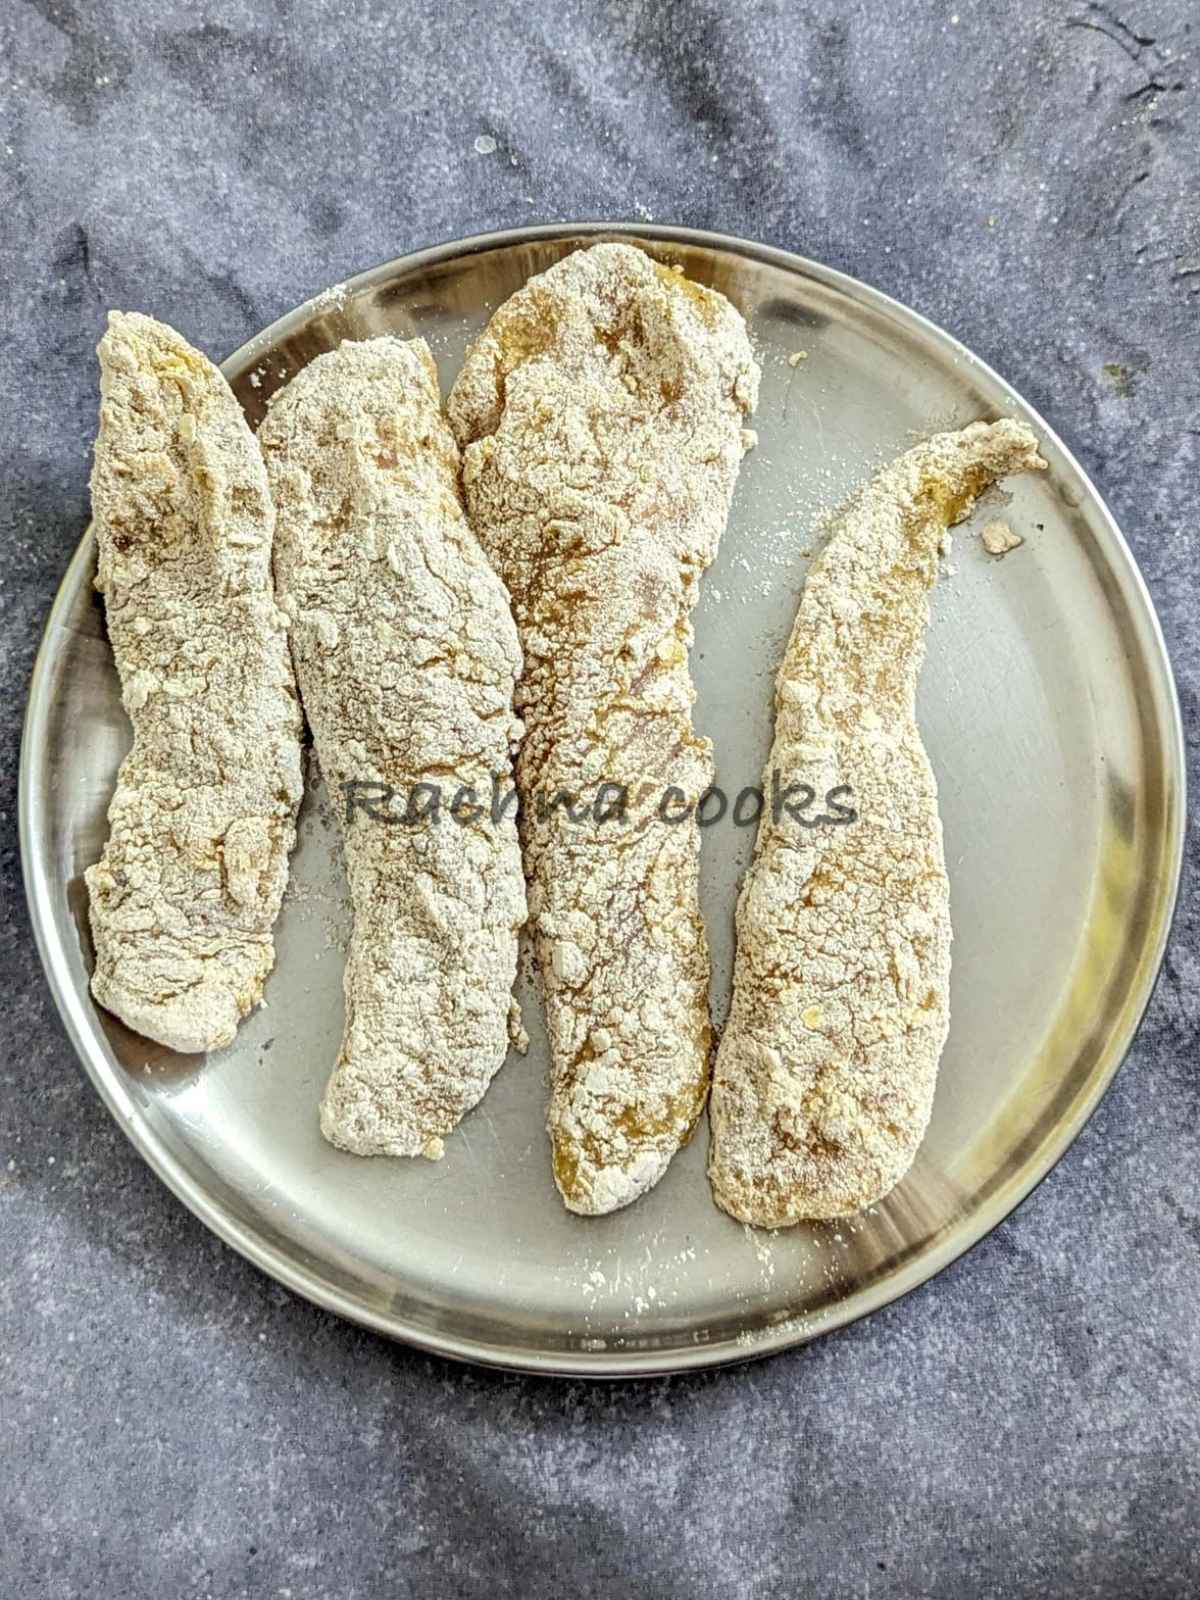 4 chicken tenders after breading on a plate.